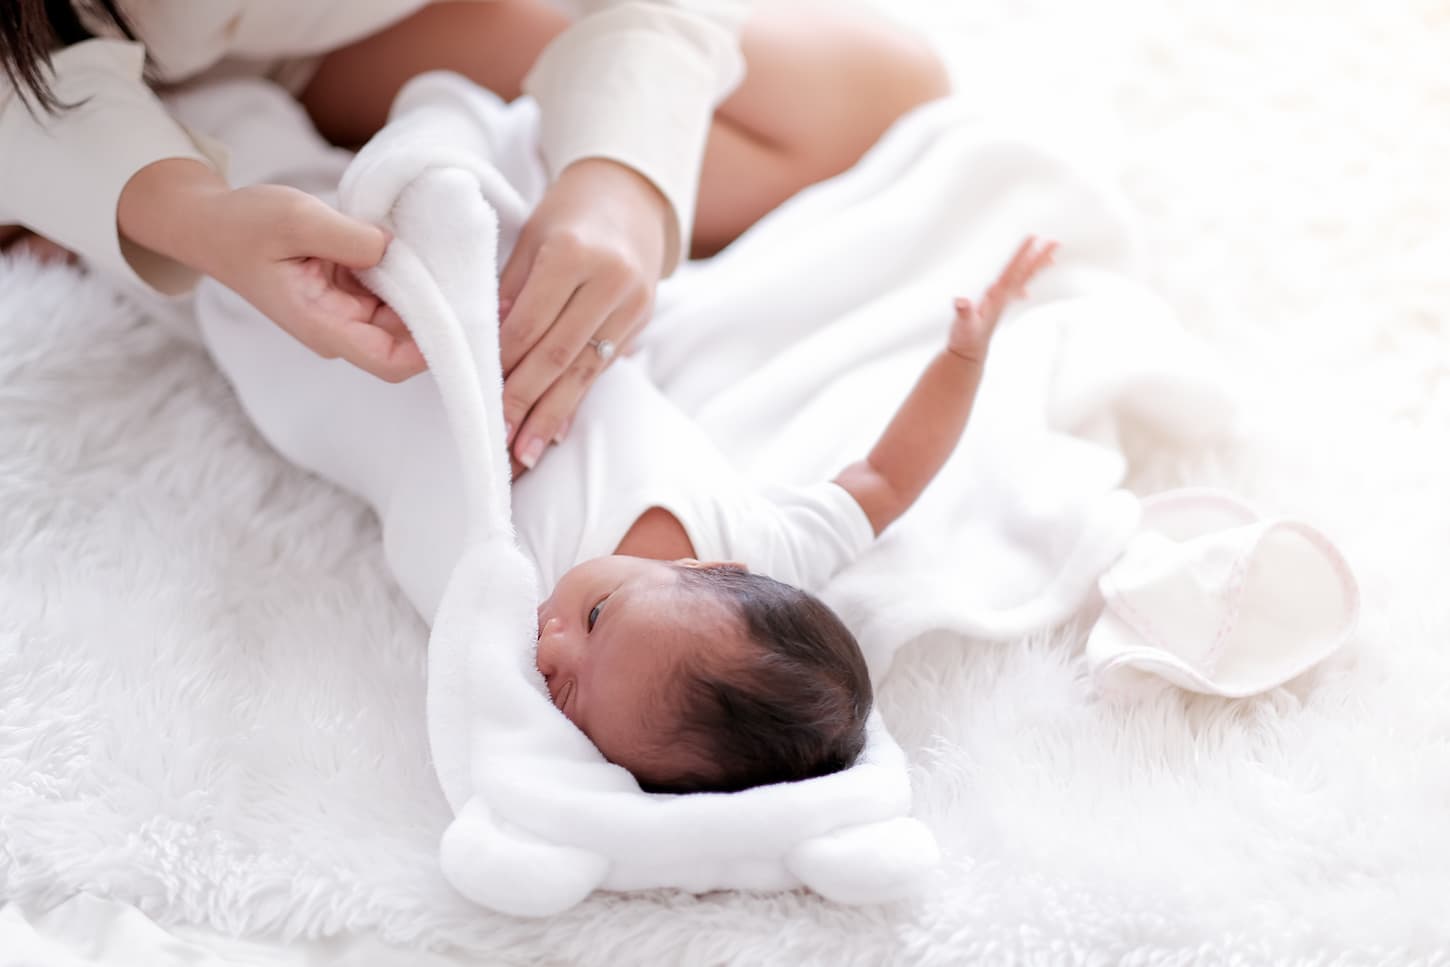 An image of a mother while swaddling her newborn baby with white cloth.